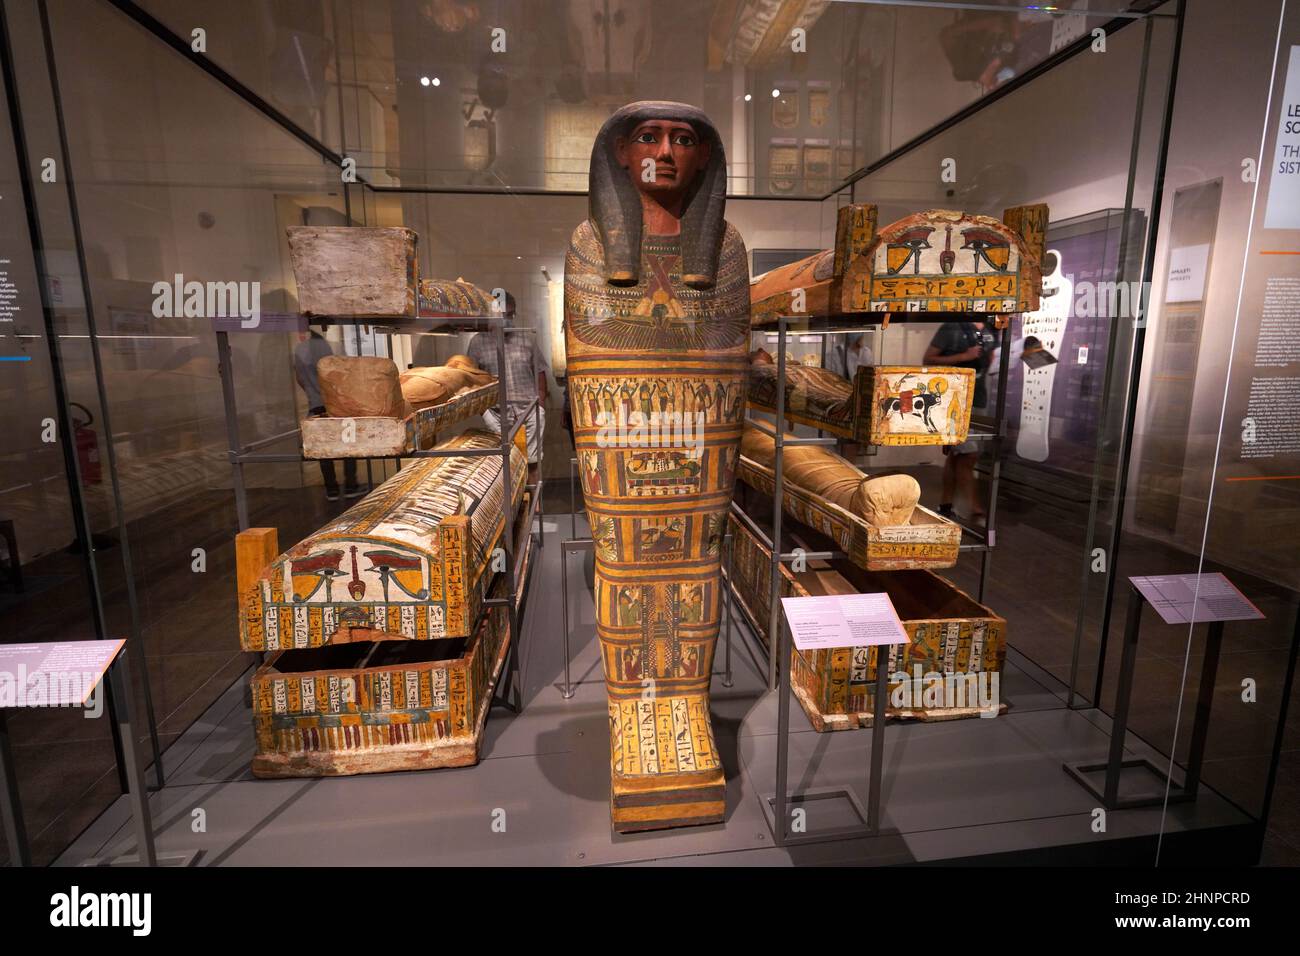 TURIN, ITALY - AUGUST 19, 2021: Inner coffin of Tamit and Egyptian sarcophagi with mummy, Egyptian Museum of Turin, Italy Stock Photo